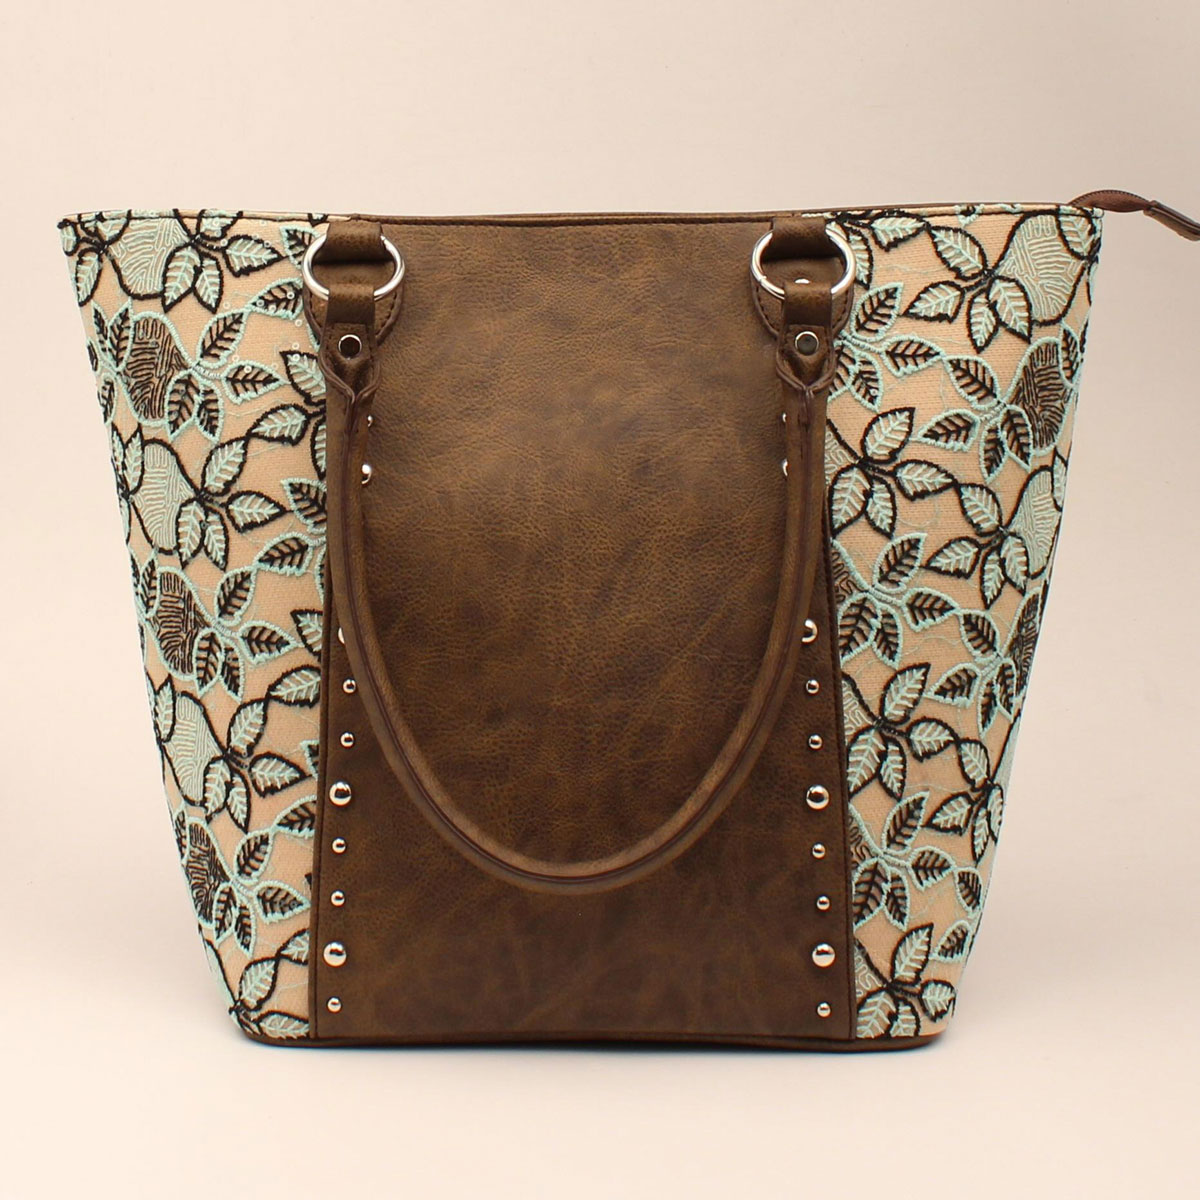 Dhb1084 Brown With Black & Mint Leaf Lace Tote Bags - Small